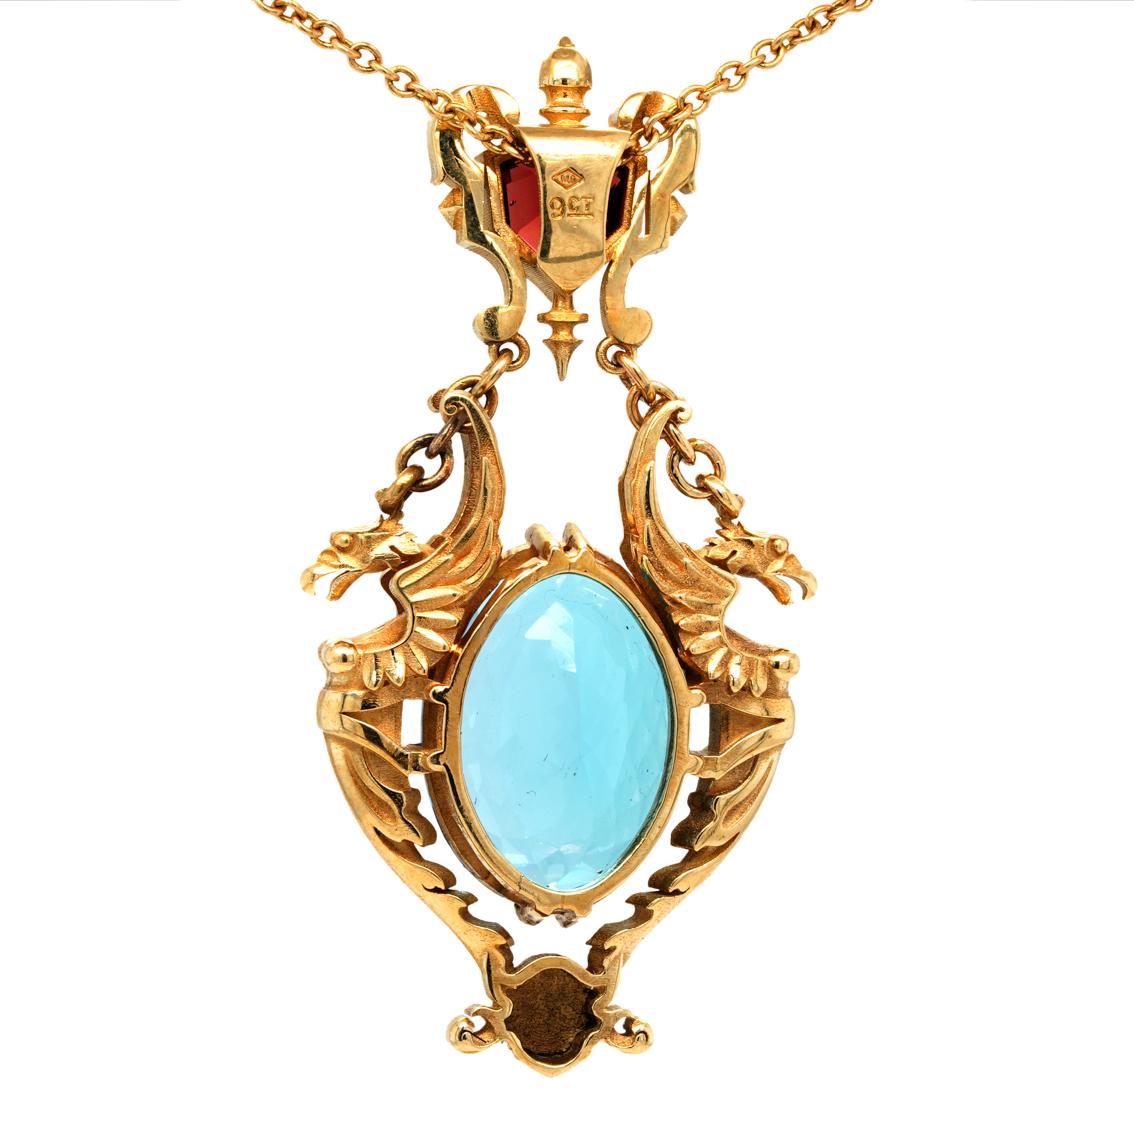 Oval Cut 28ct Oval Swiss Blue Topaz, Garnet 9k Yellow Gold Antique Style Pendant Necklace For Sale